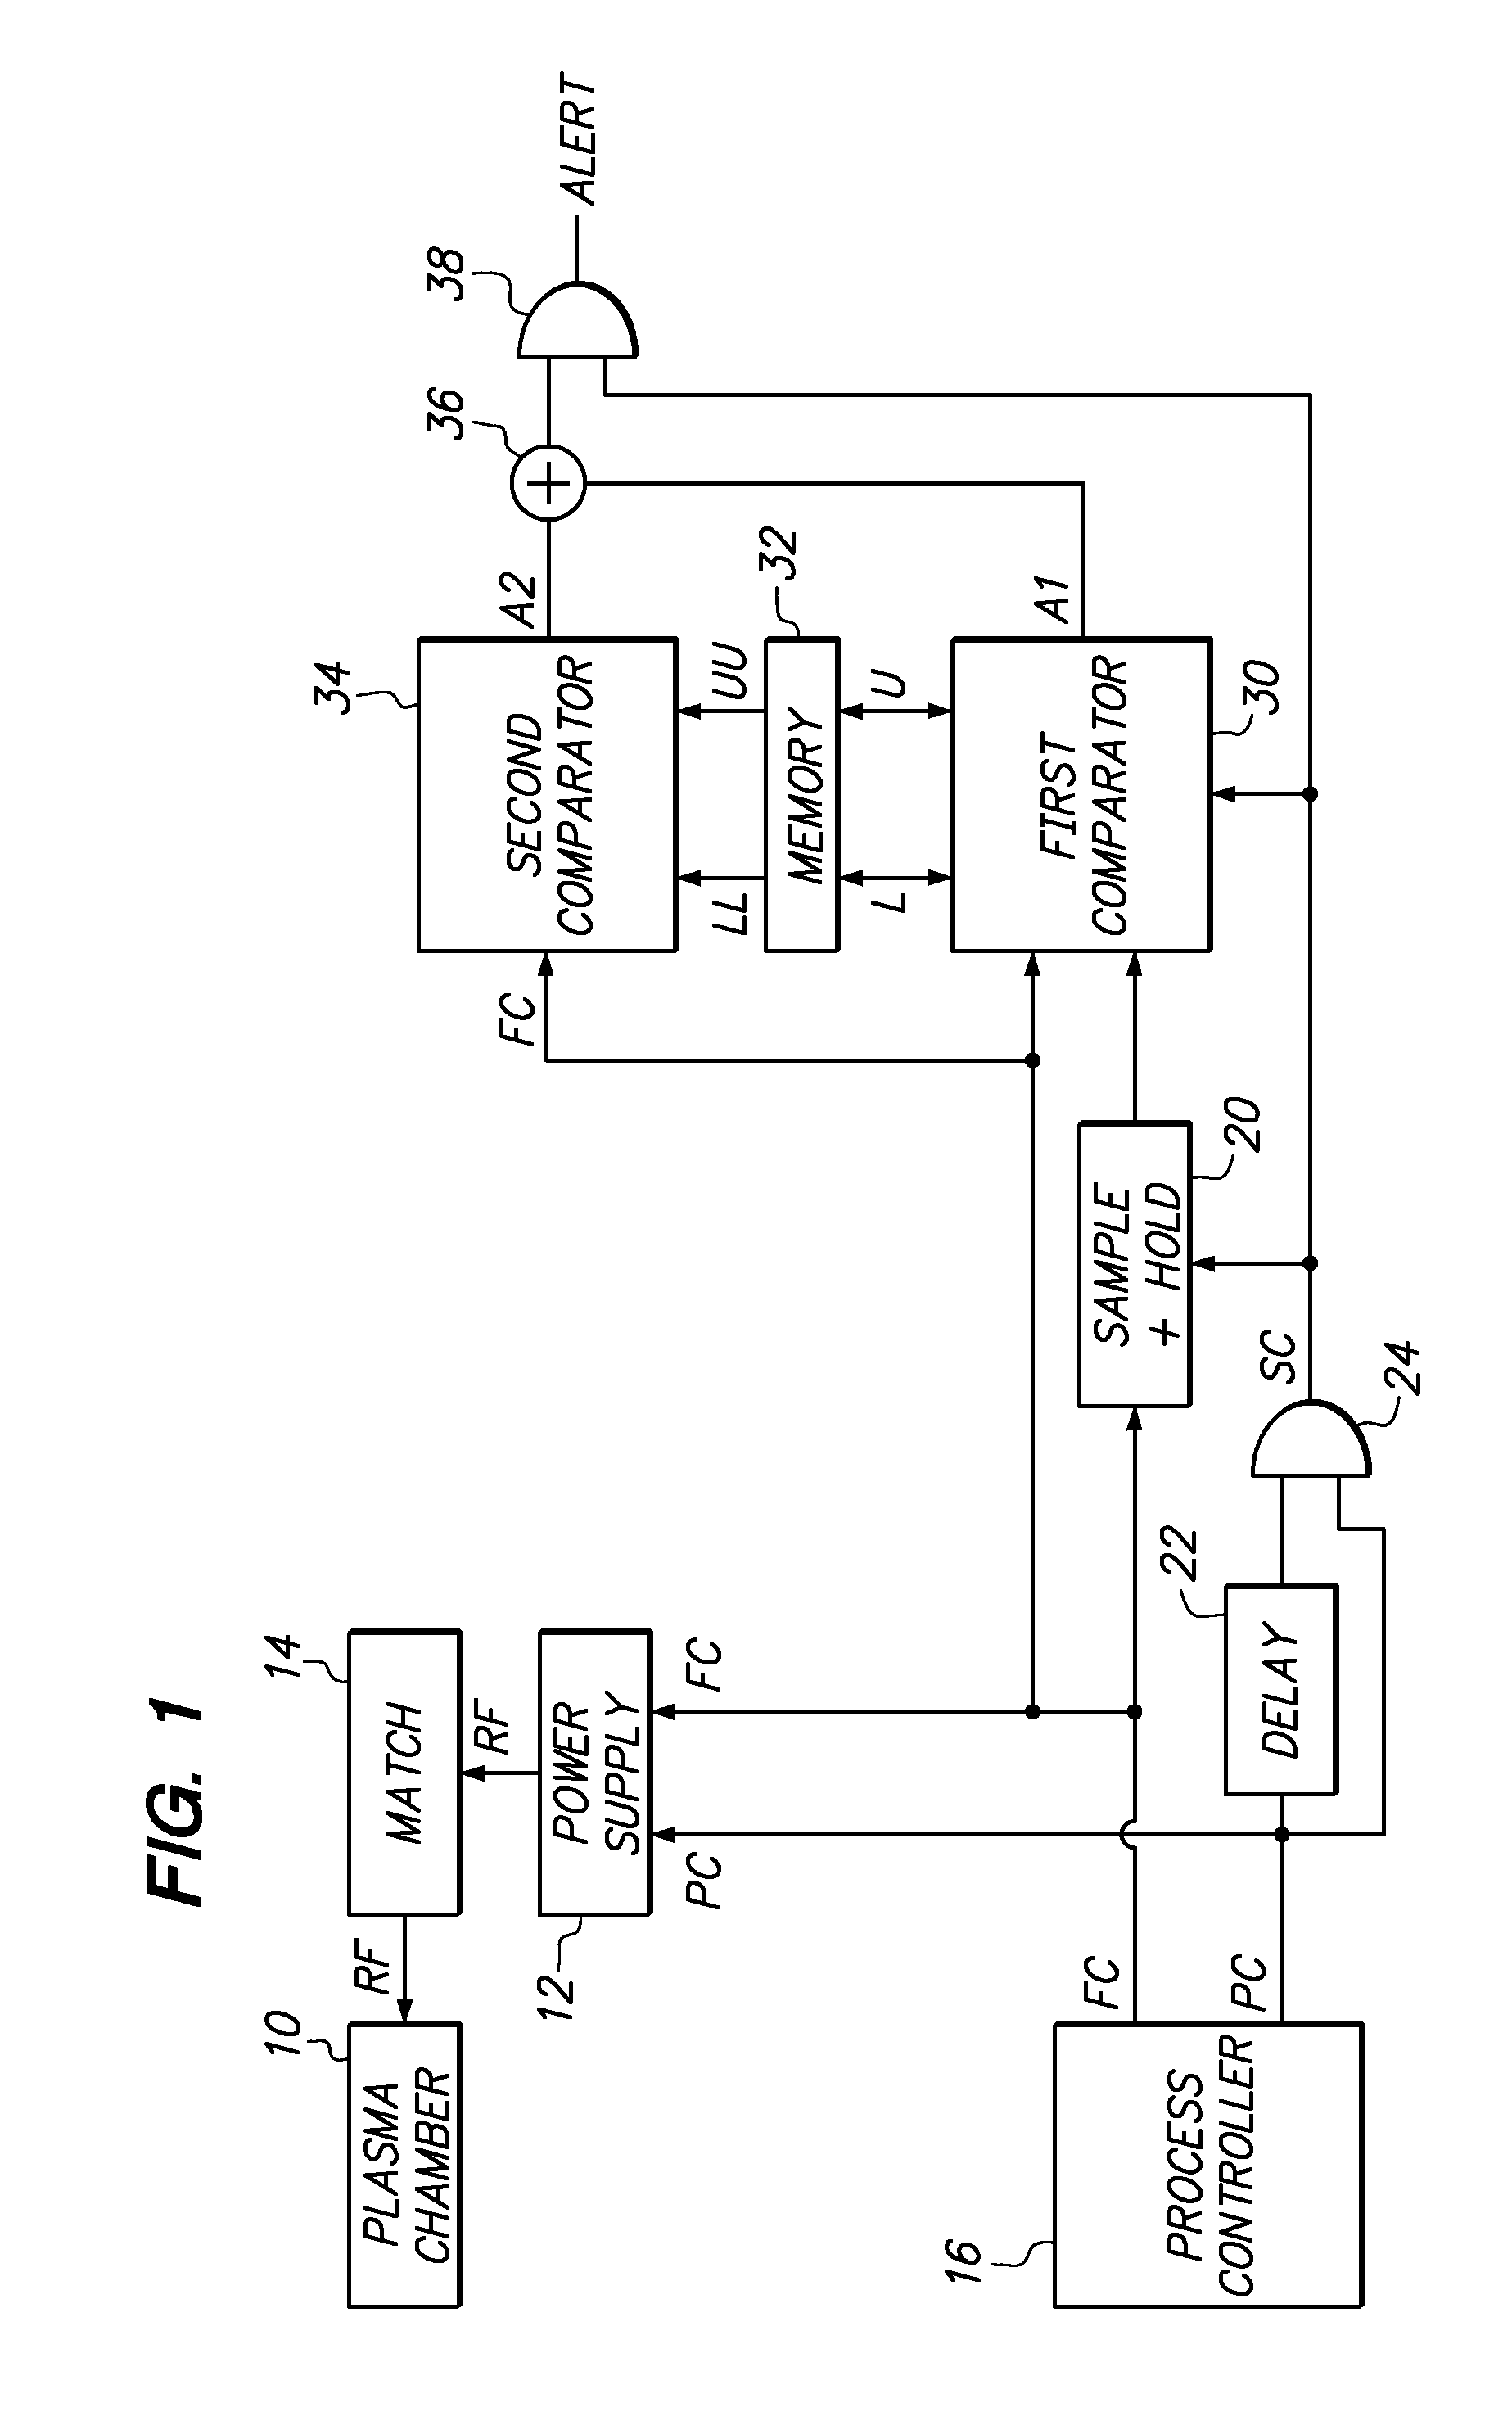 Frequency Monitoring to Detect Plasma Process Abnormality